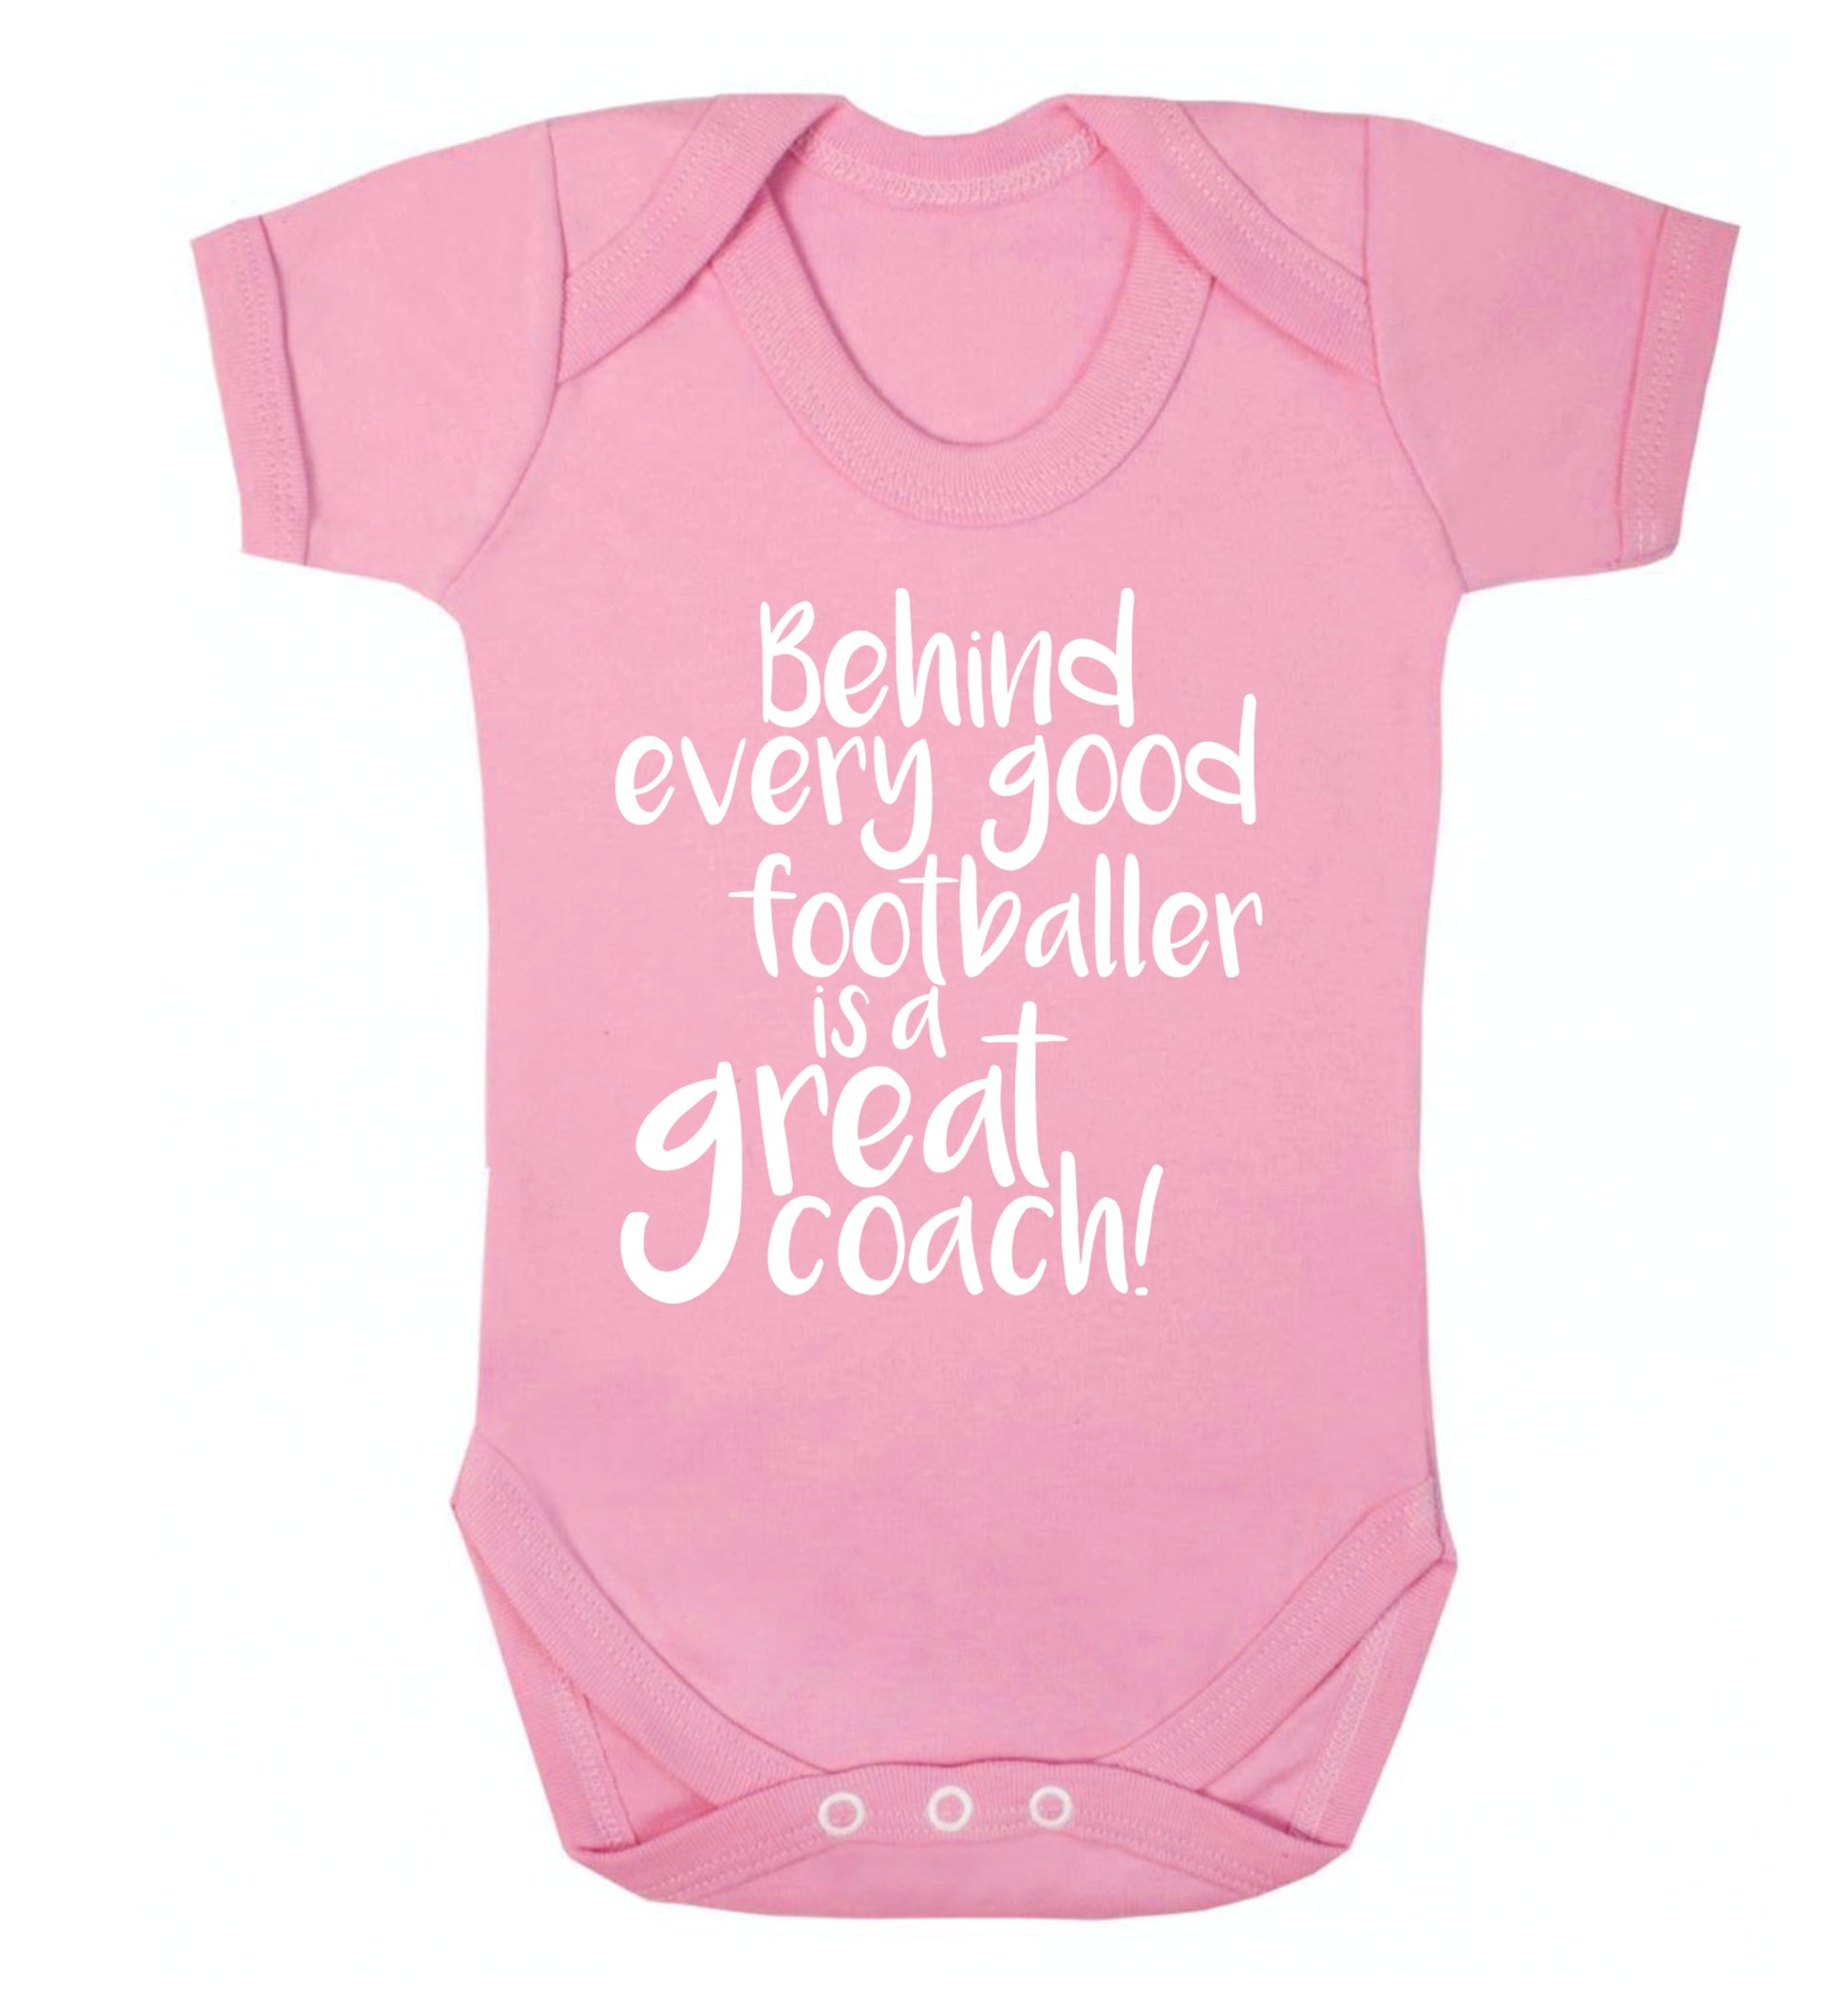 Behind every good footballer is a great coach! Baby Vest pale pink 18-24 months